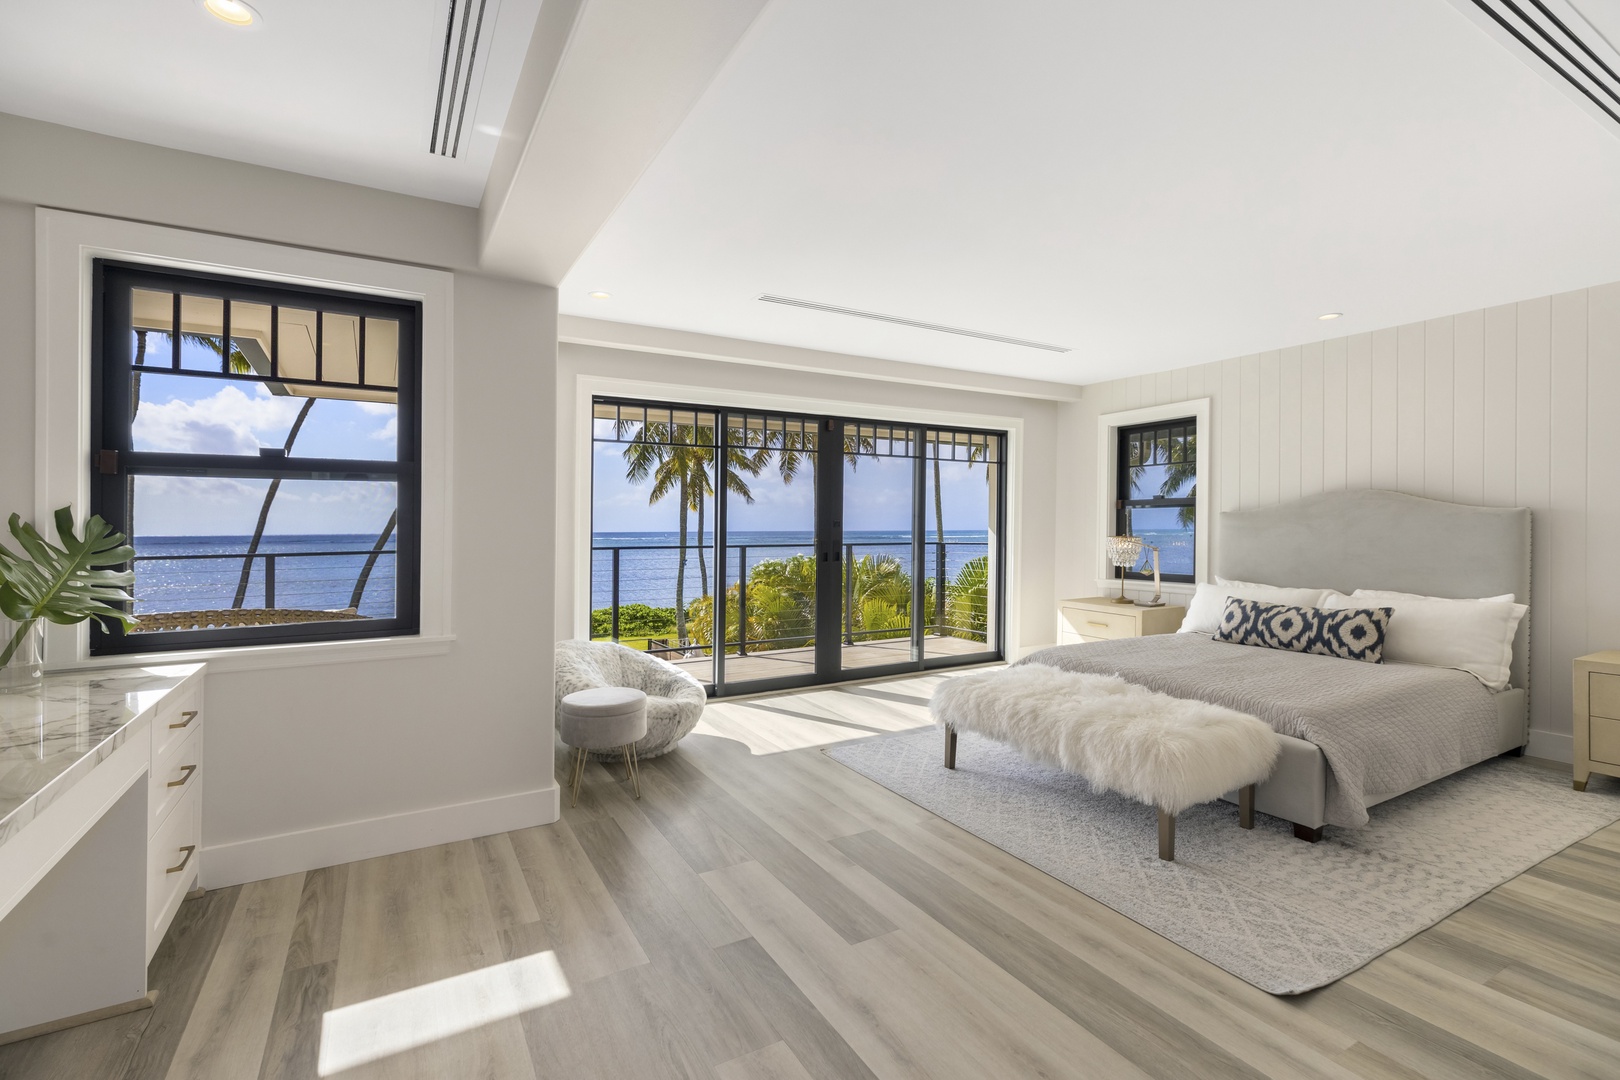 Honolulu Vacation Rentals, Niu Beach Estate - The primary bedroom comes with a comfy king bed, smart TV, private lanai with ocean views, and a gorgeous & spacious private ensuite